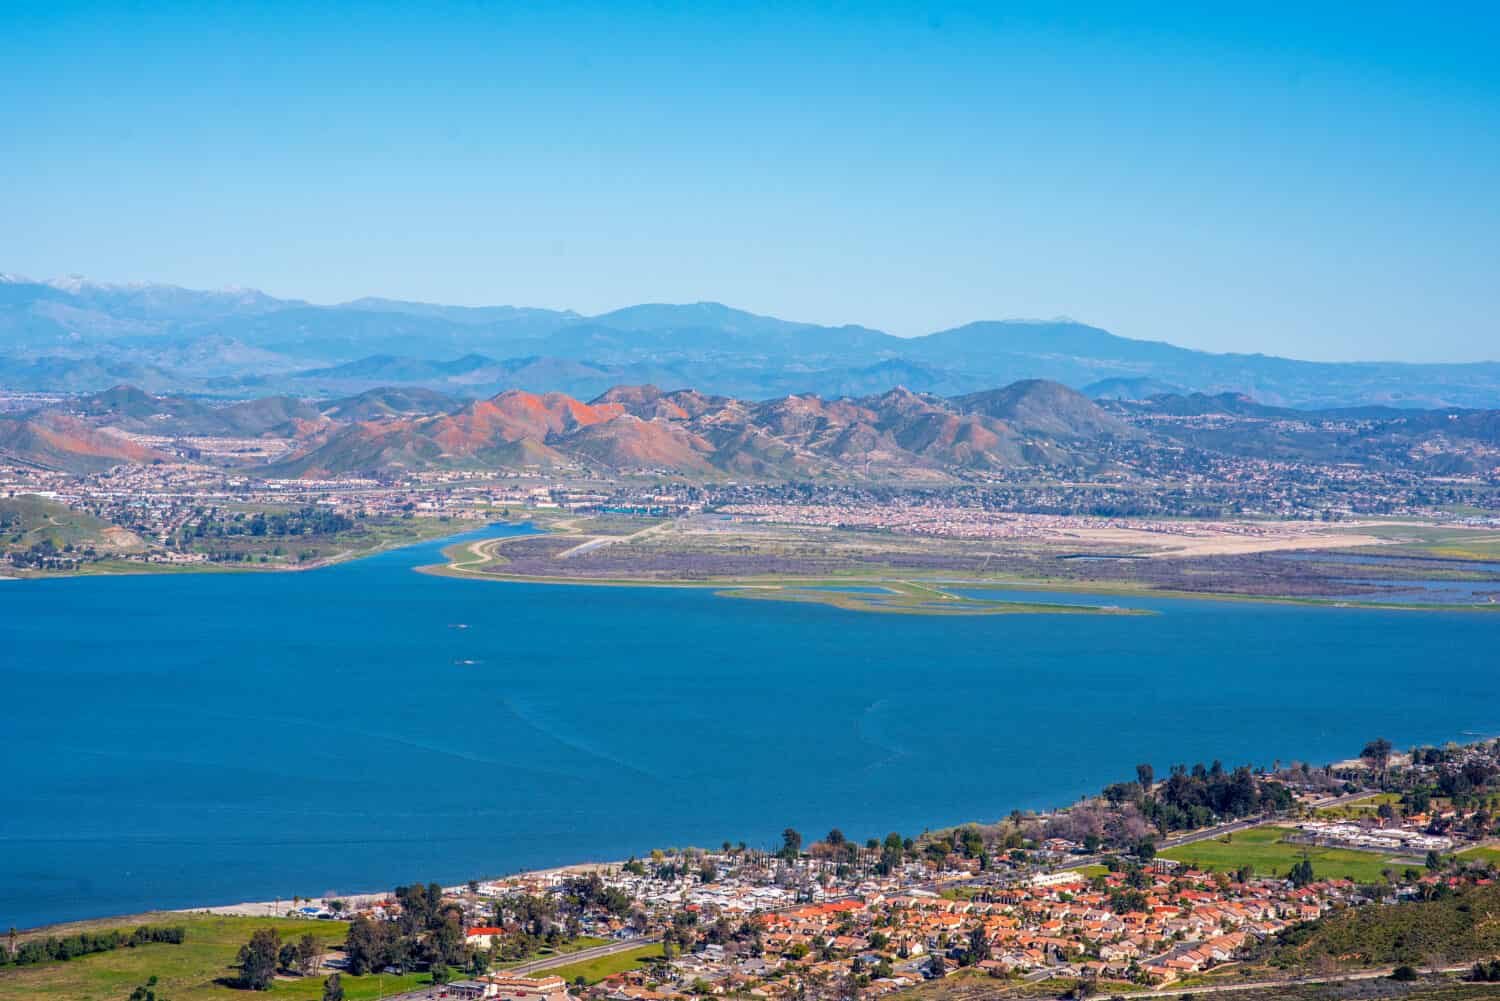 Lake Elsinore, Ca commercial property management